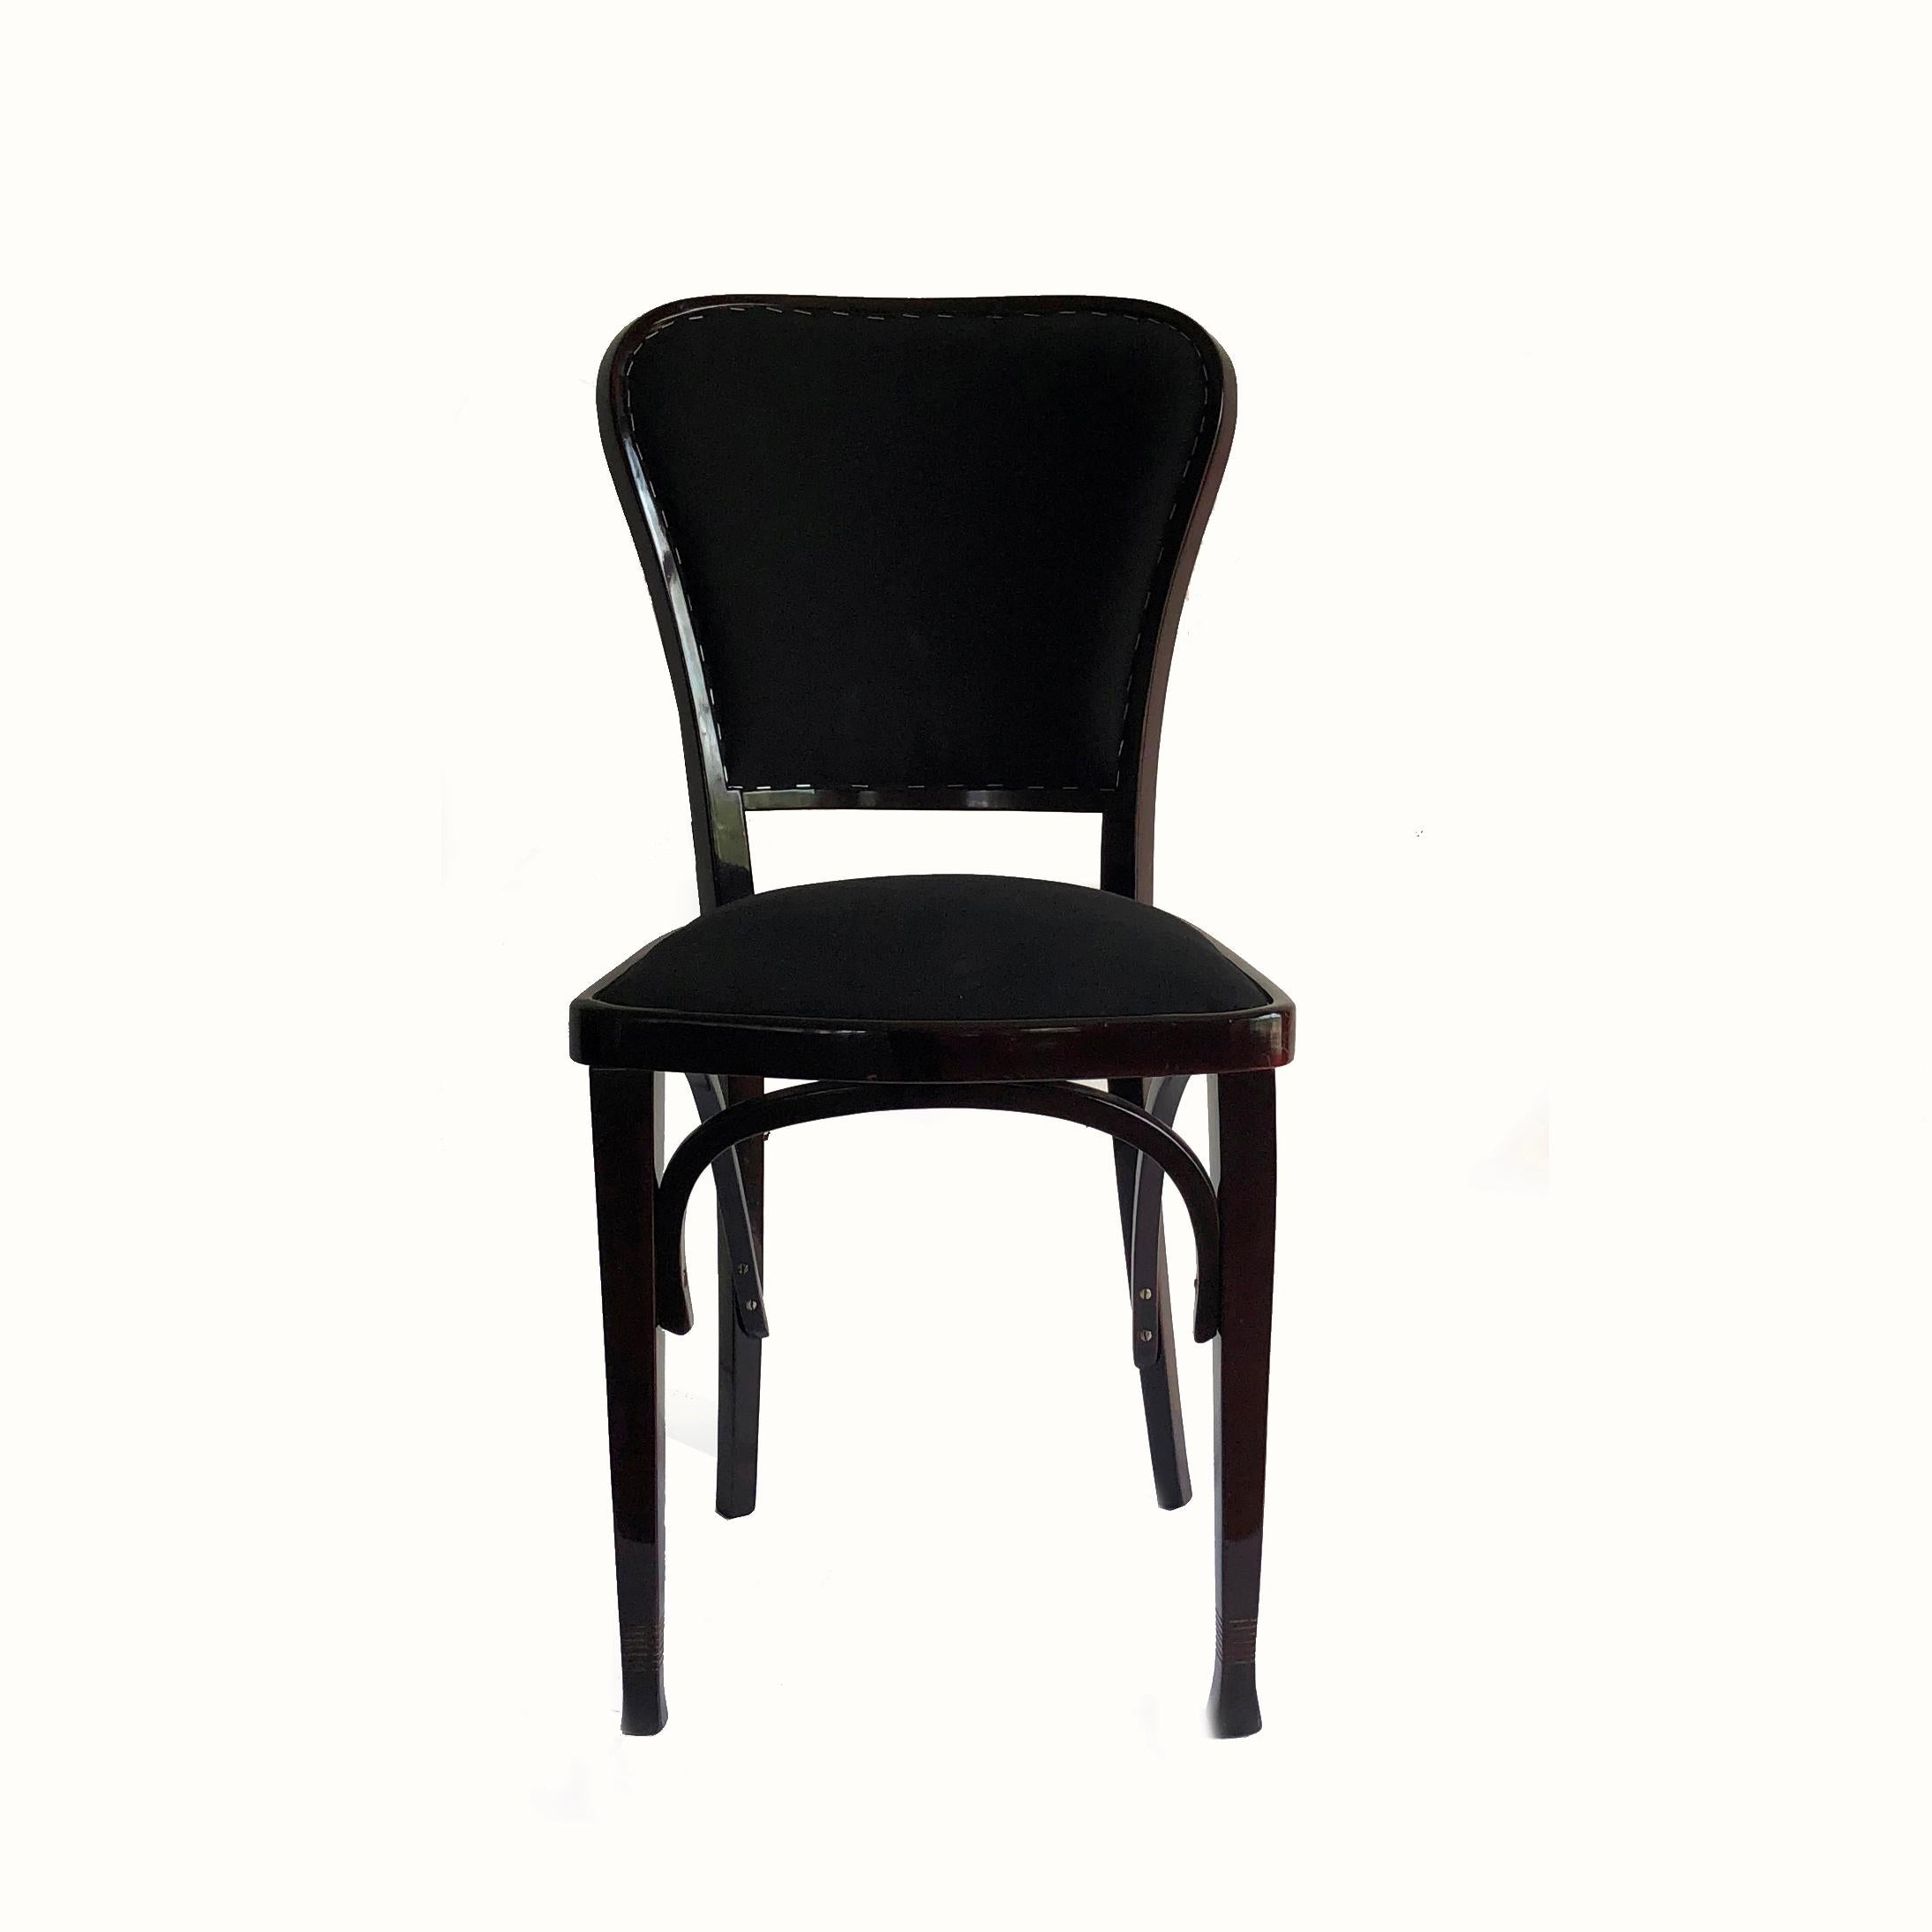 Bent beech wood, stained and polished, re-upholstered in black 0-upholstery.
The chairs were first presented as part of a dining room group at the Austrian Museum of Art and Industry, today MAK, in 1901/02.
Delivery time in case of reupholstery